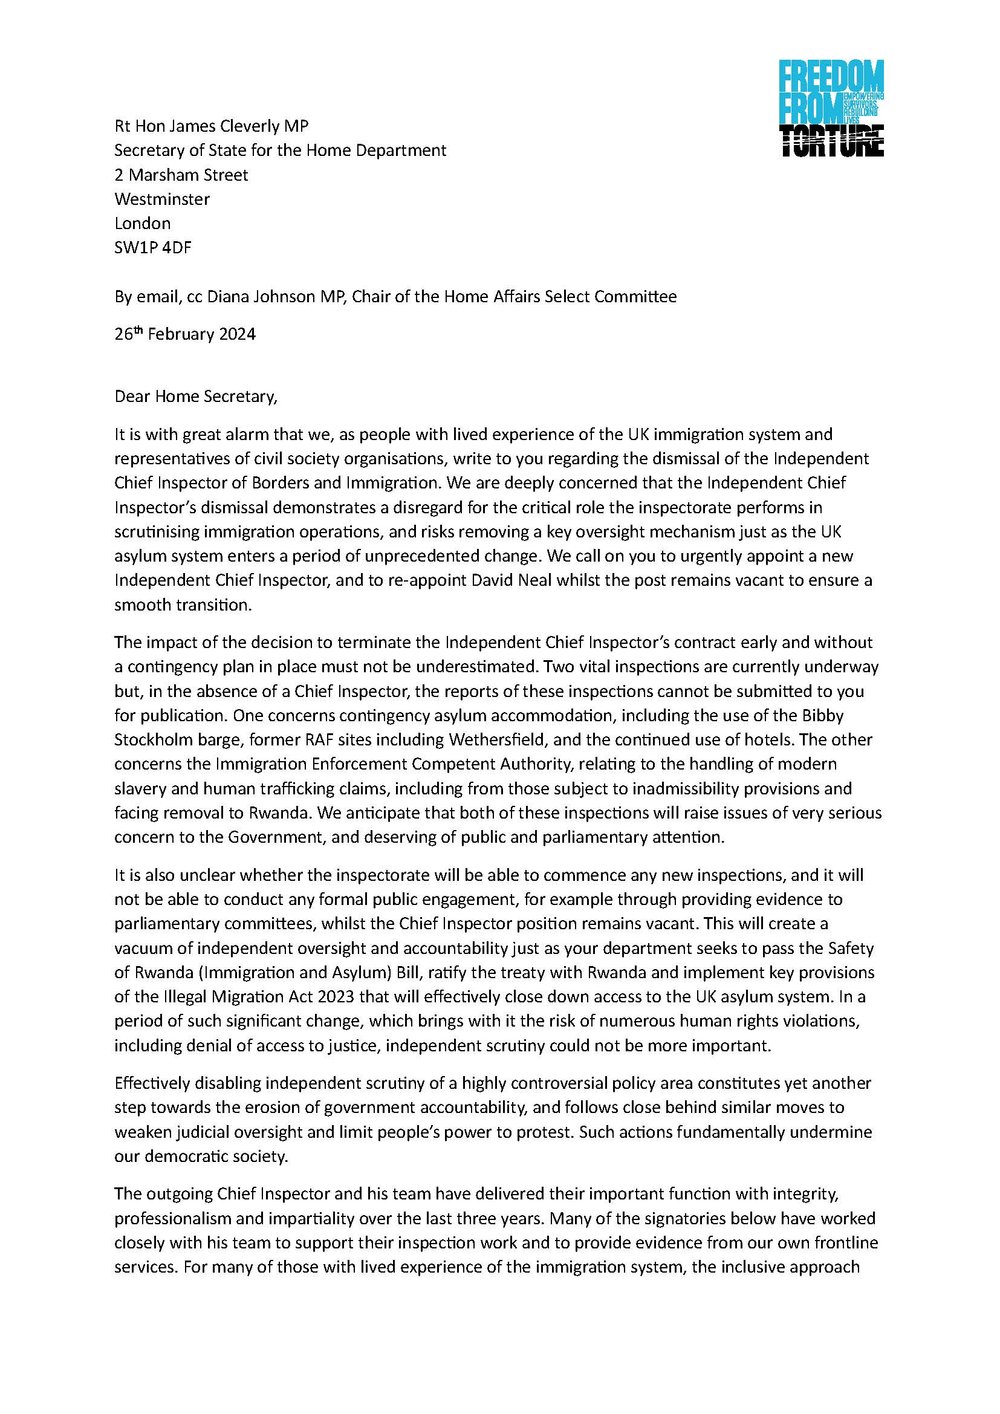 Independent Chief Inspector of Borders and Immigration_letter to Home Secretary_+_Page_1.jpg